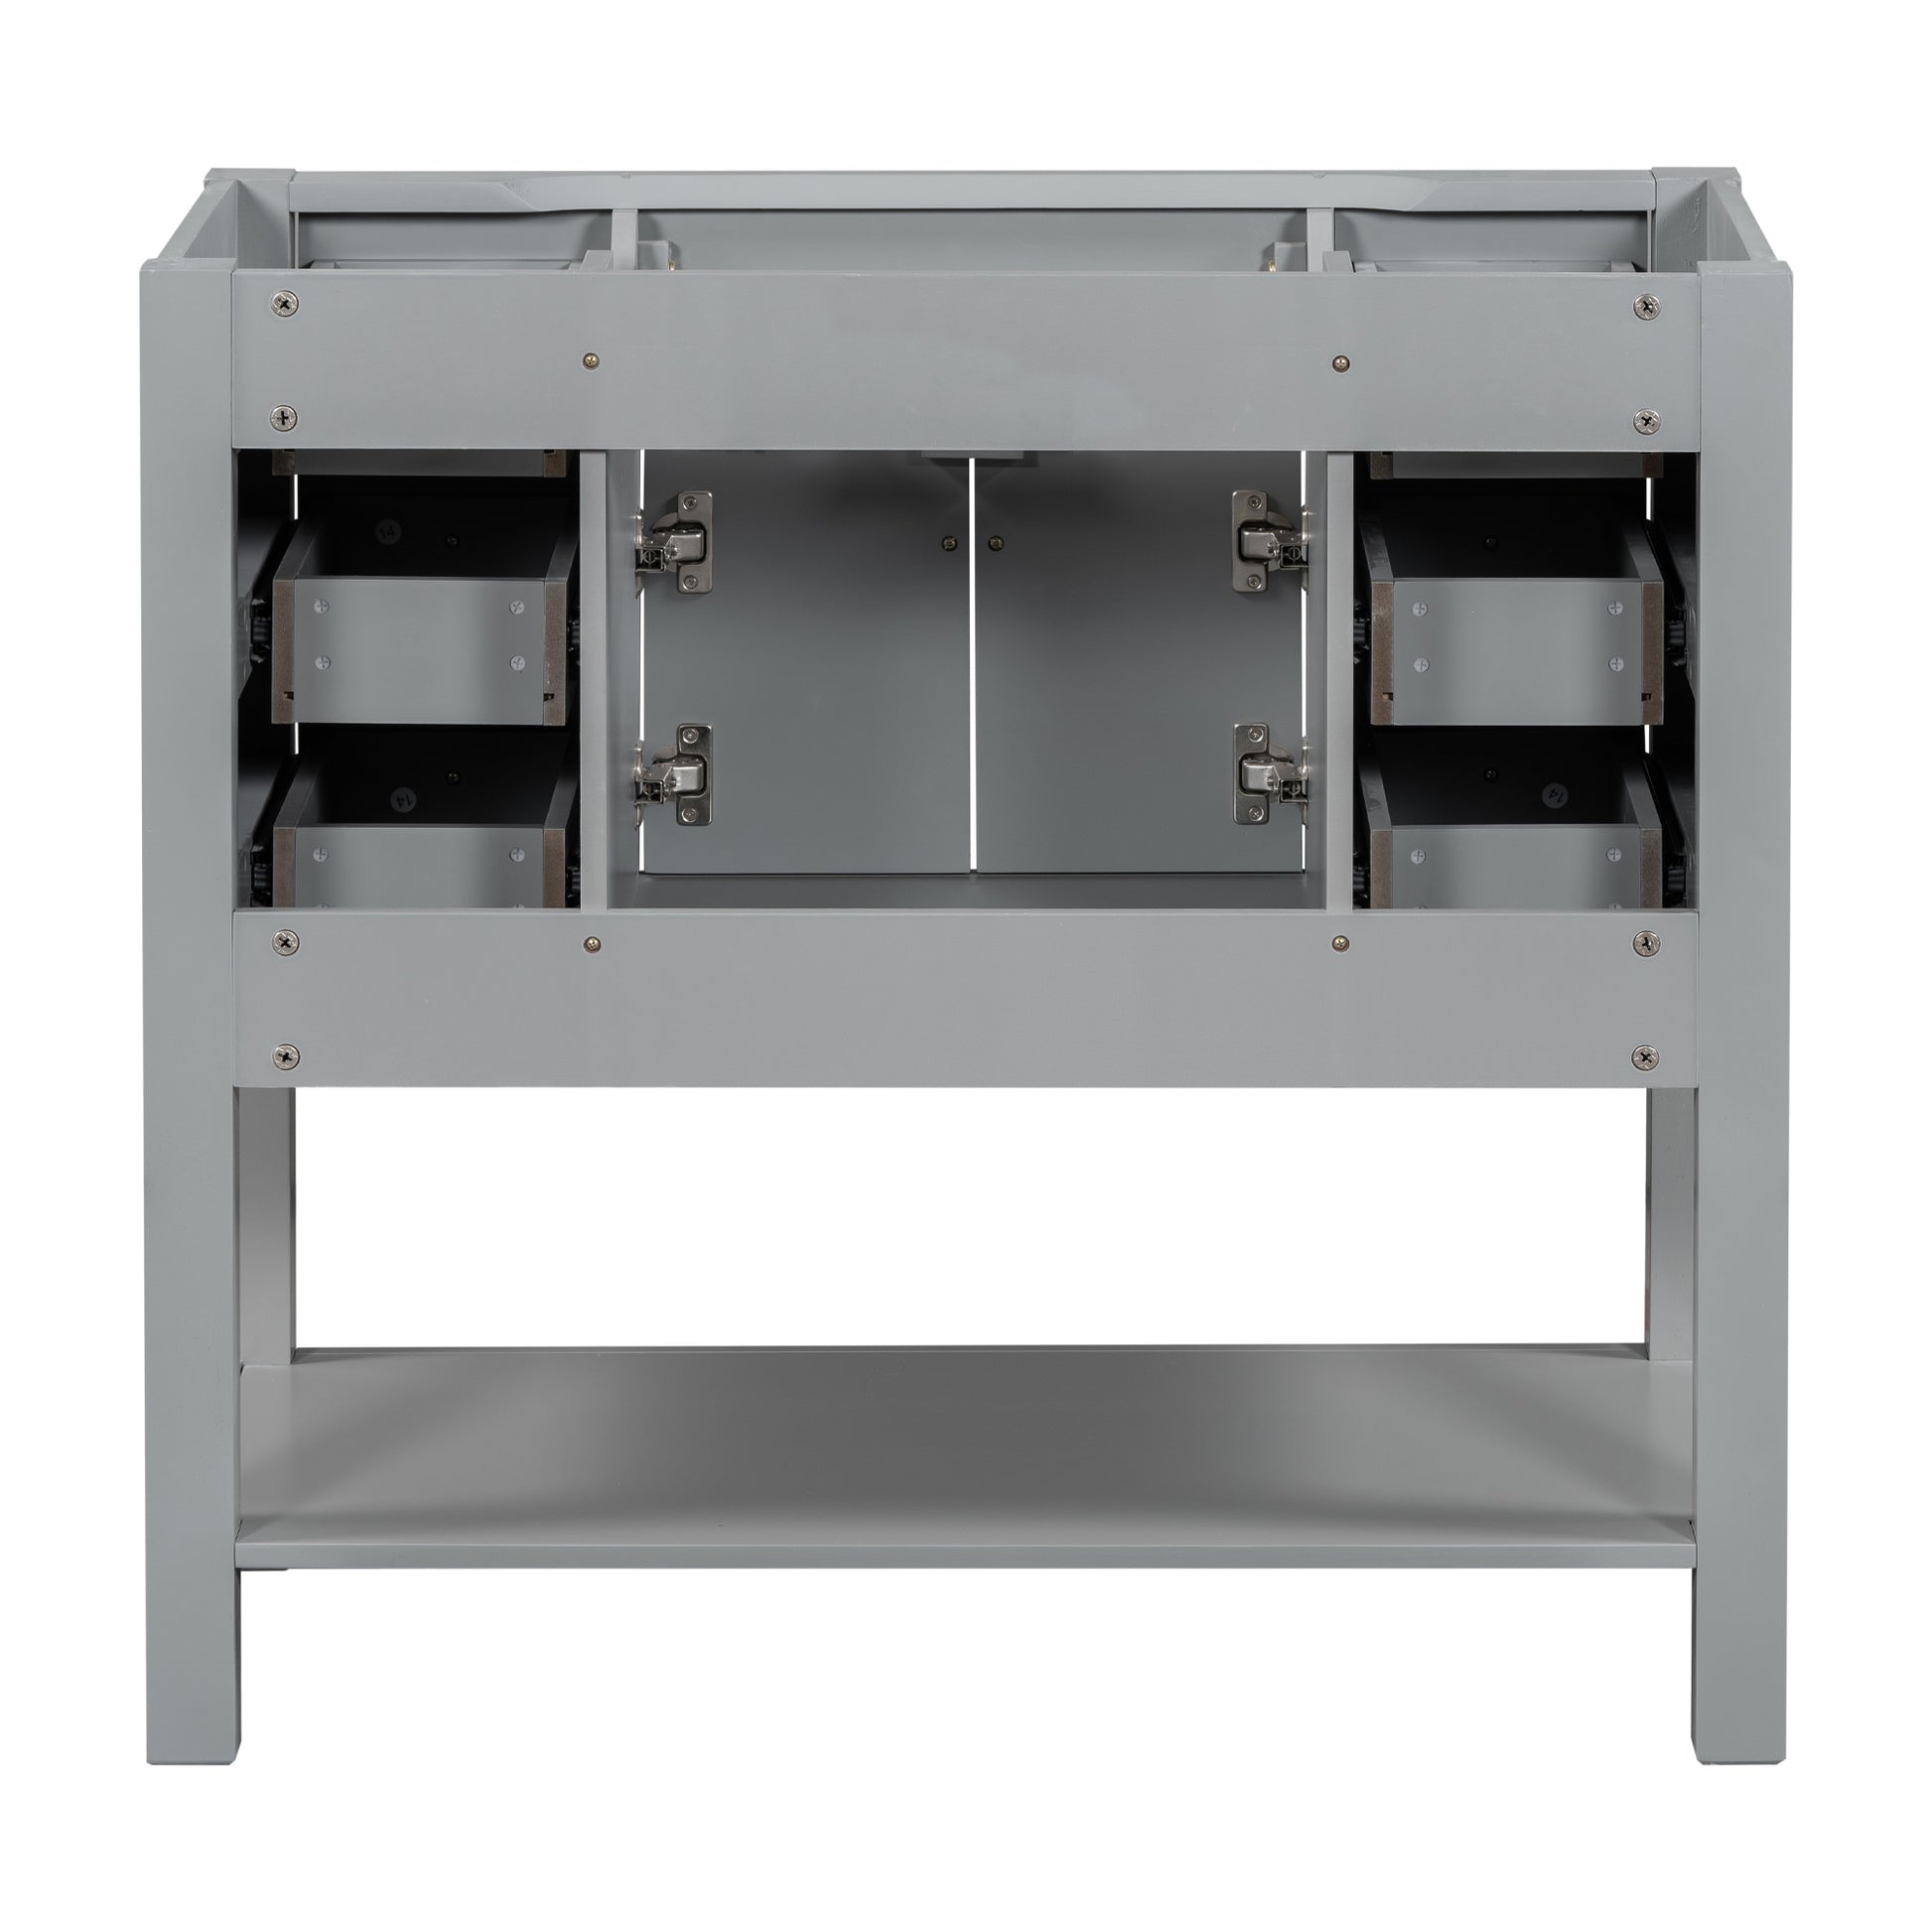 36'' Bathroom Vanity without Top Sink, Grey Cabinet 4+-grey-2-1-soft close